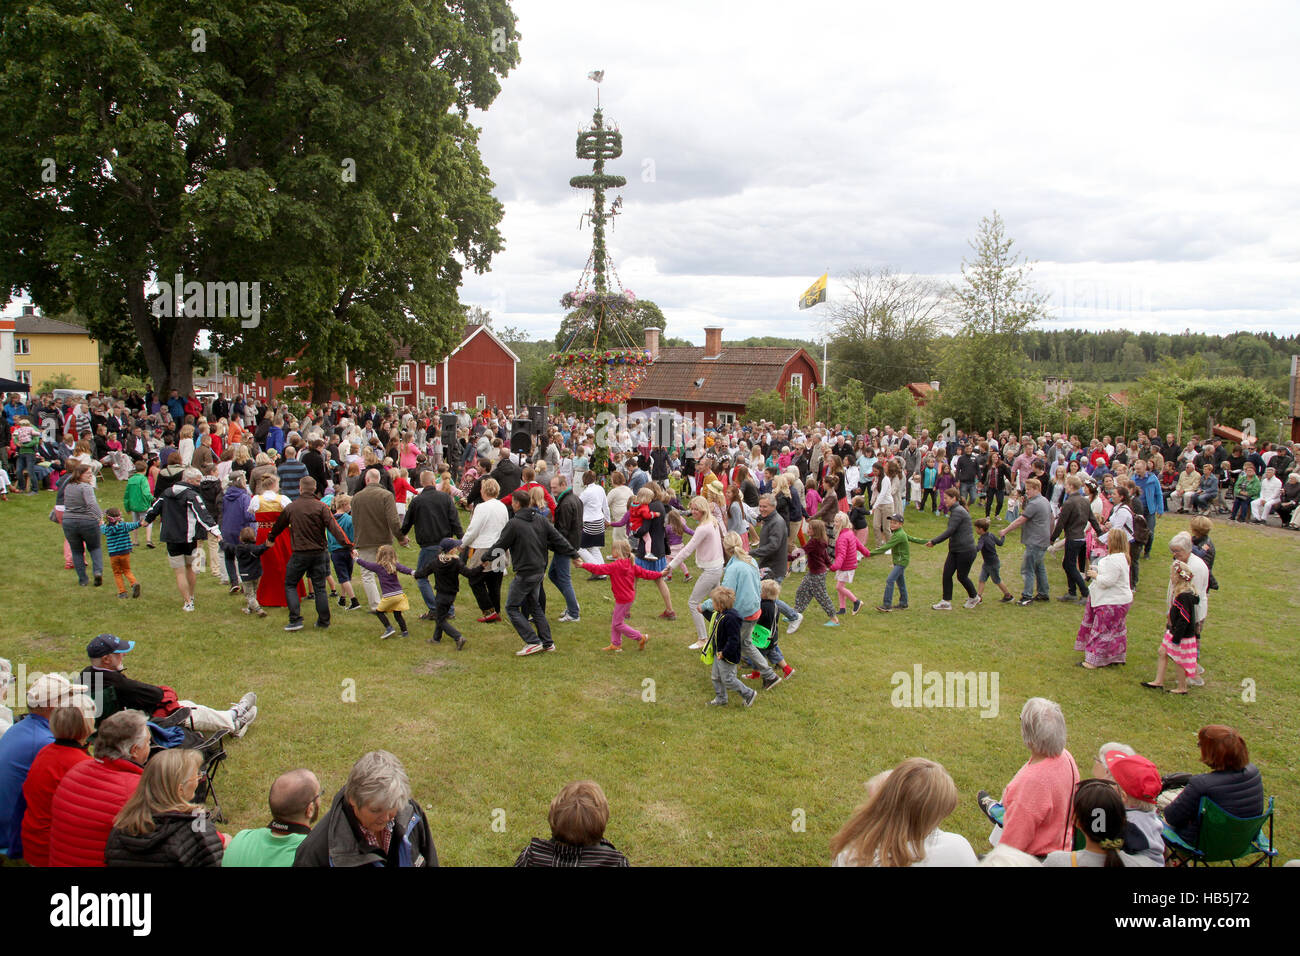 MID SUMMER Celebration at Malmkoping Sweden 2014 people dance around the Maypole Stock Photo